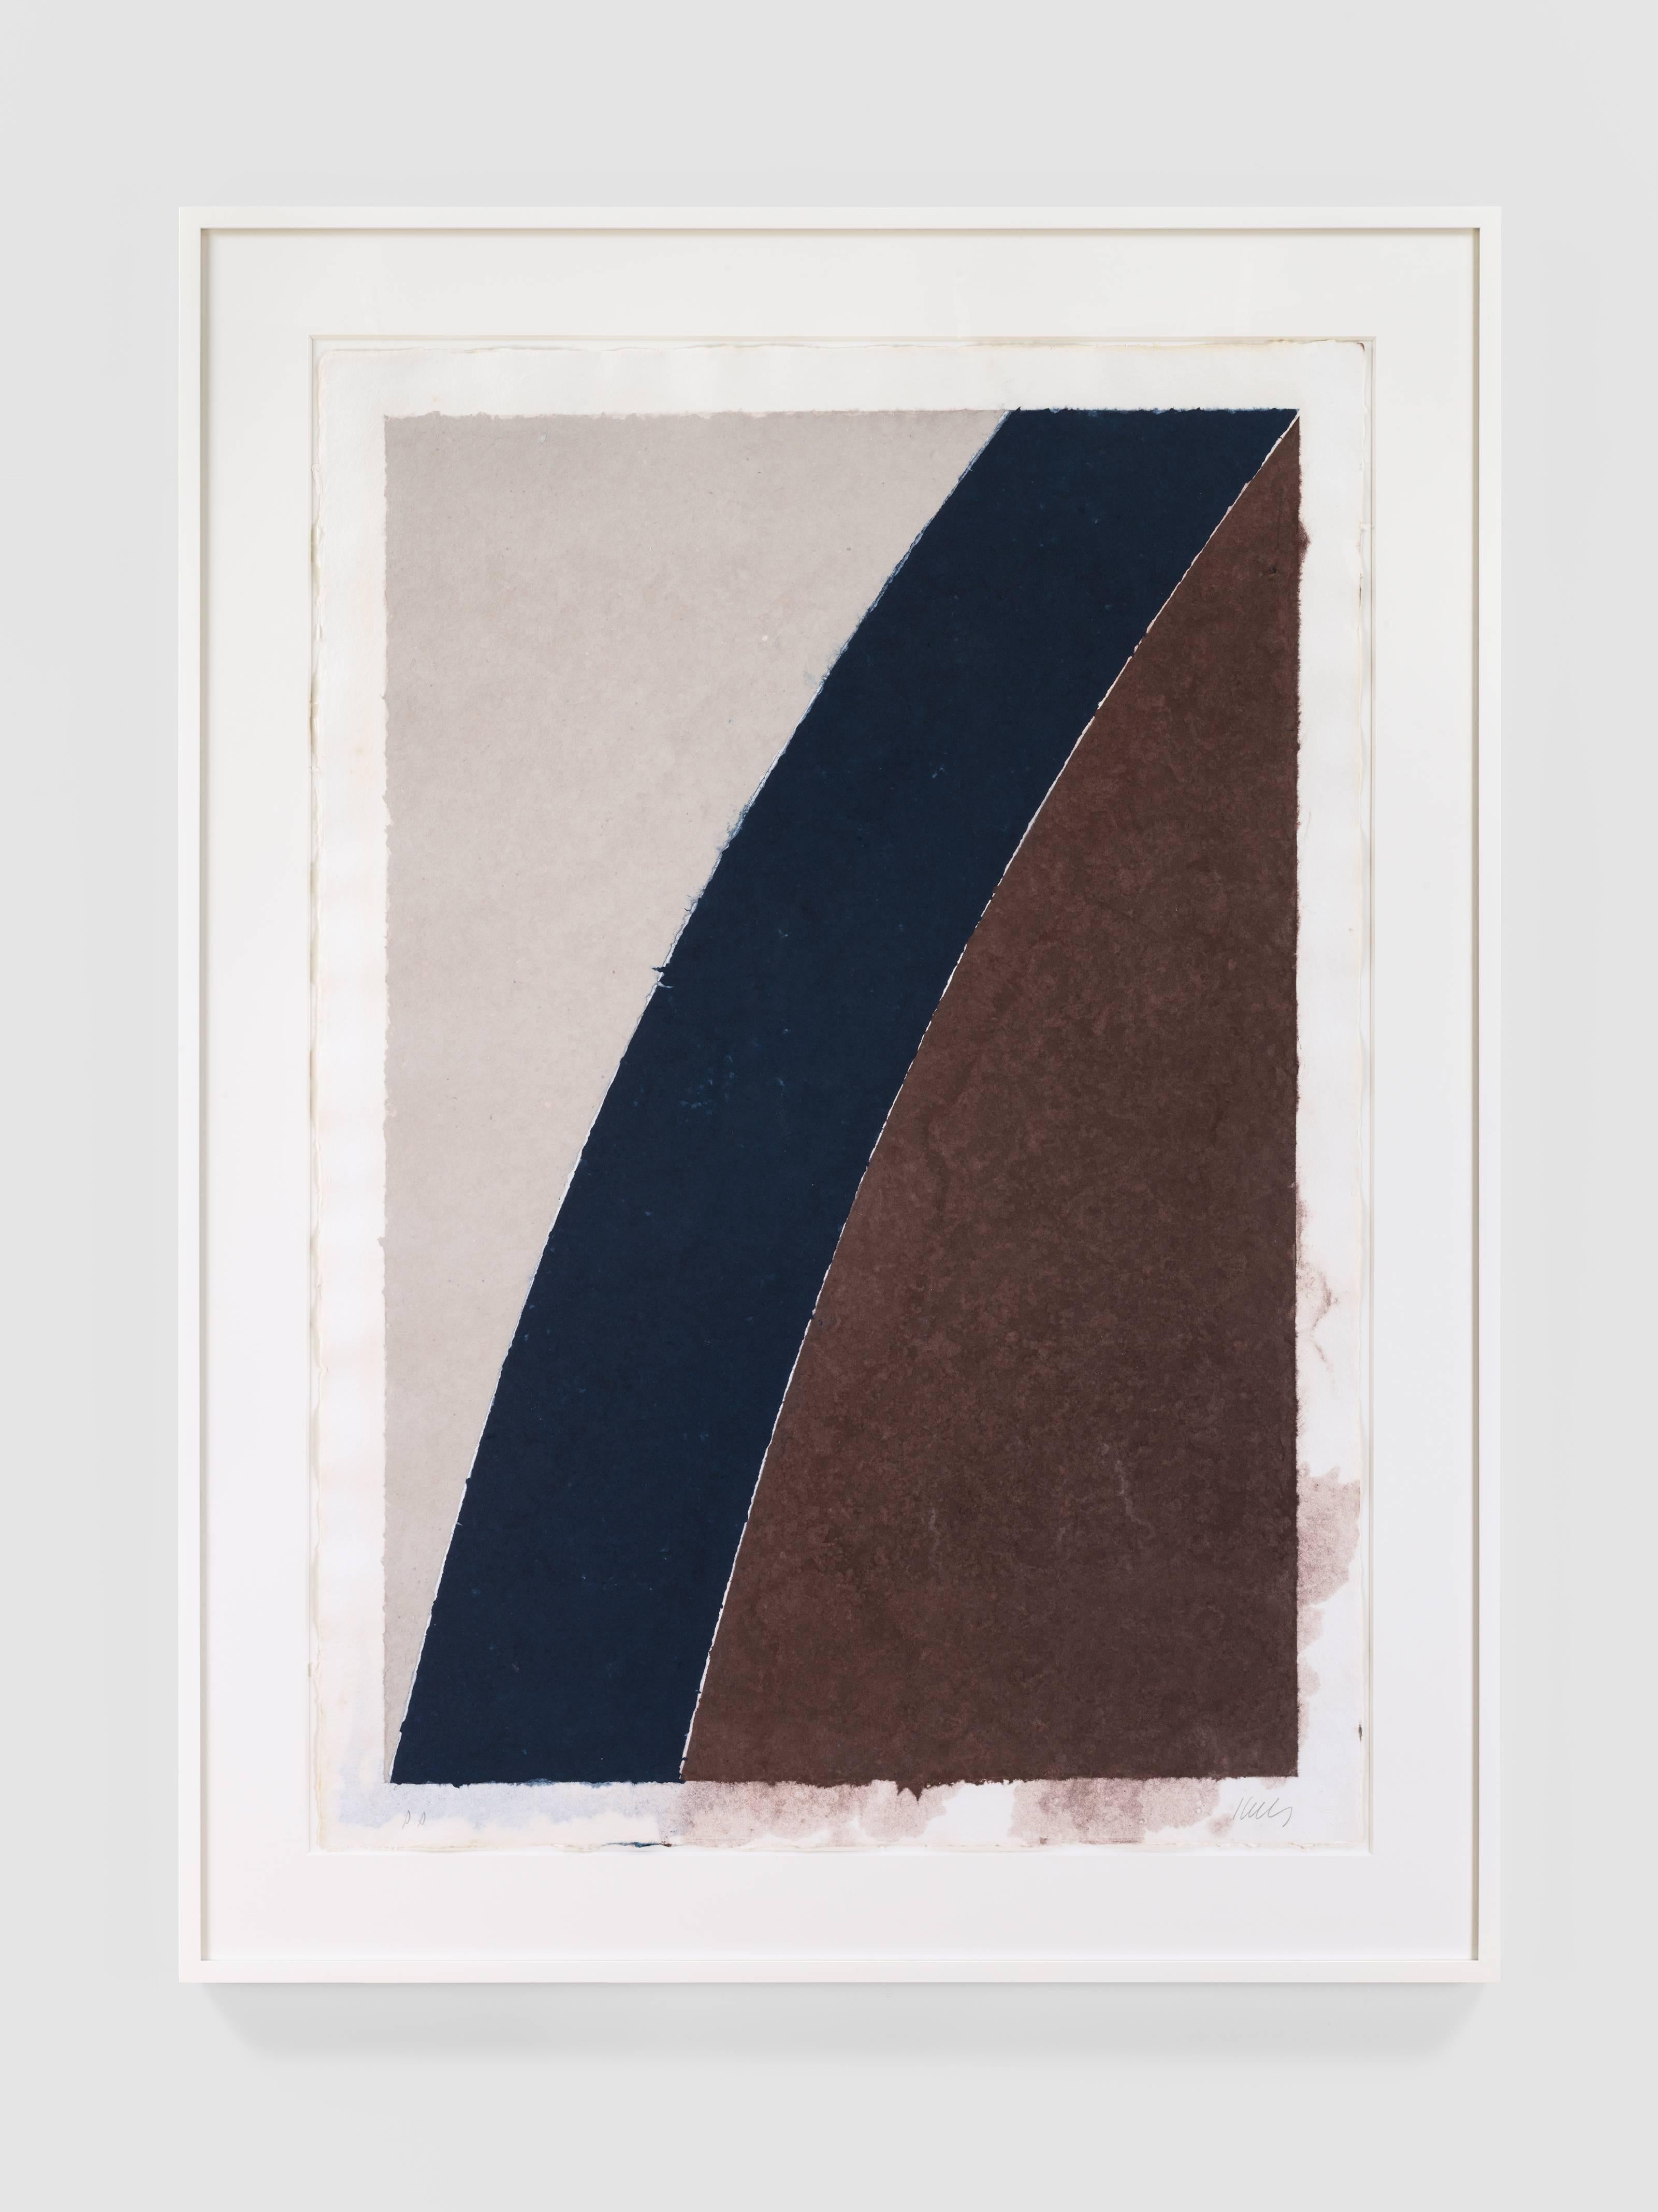 Colored Paper Image XII (Blue Curve with Brown and Gray) - Print by Ellsworth Kelly